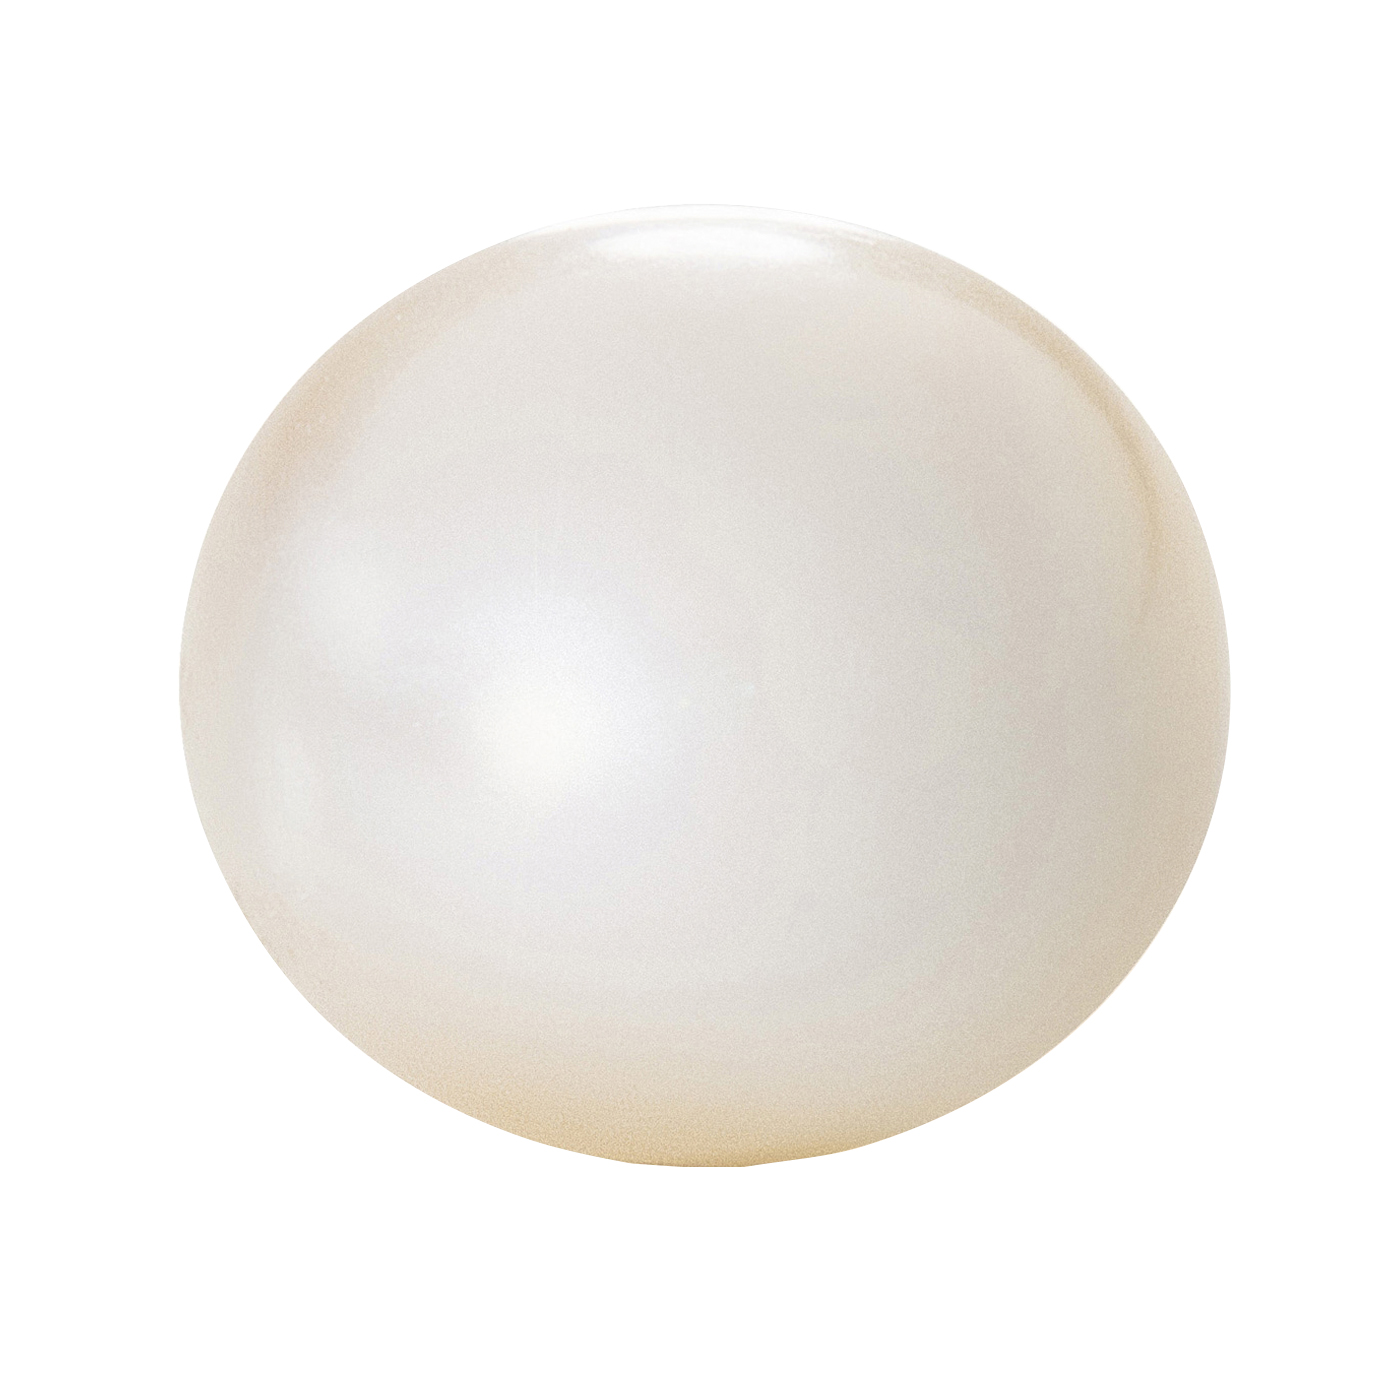 Cultured Pearl, Freshwater, Bouton, ø 4.5-5.0 mm, White - 1 piece